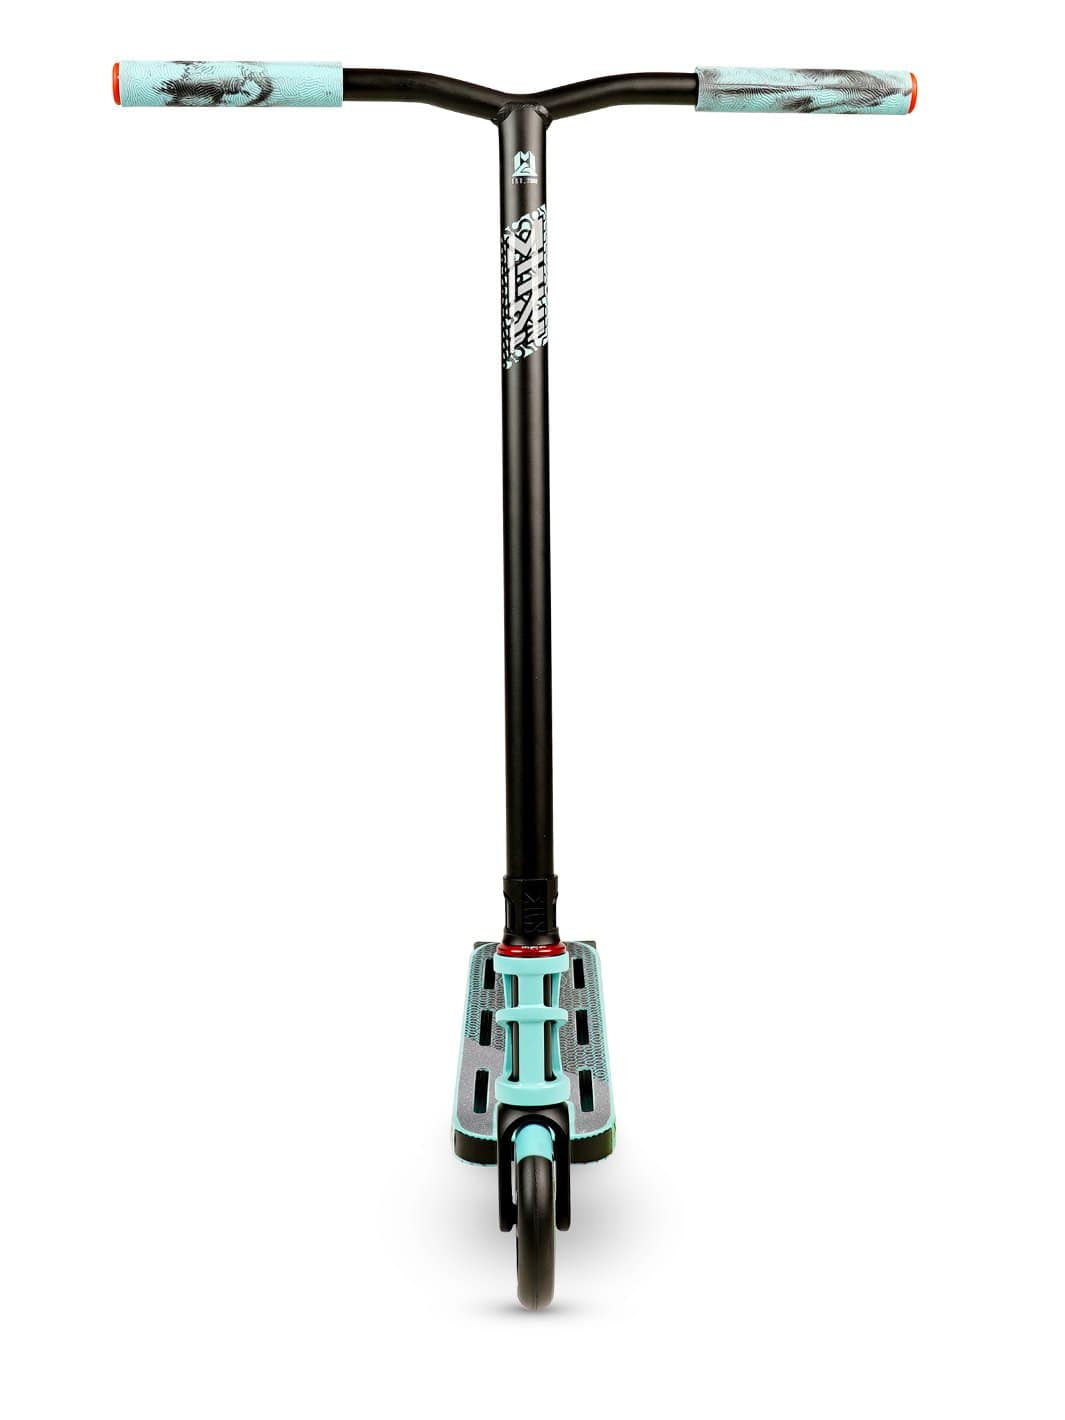 Madd Gear MGP MGX P2 Pro Stunt Scooter Complete High Quality Razor Trick Skate Park Mad Teal Black Taze Grips